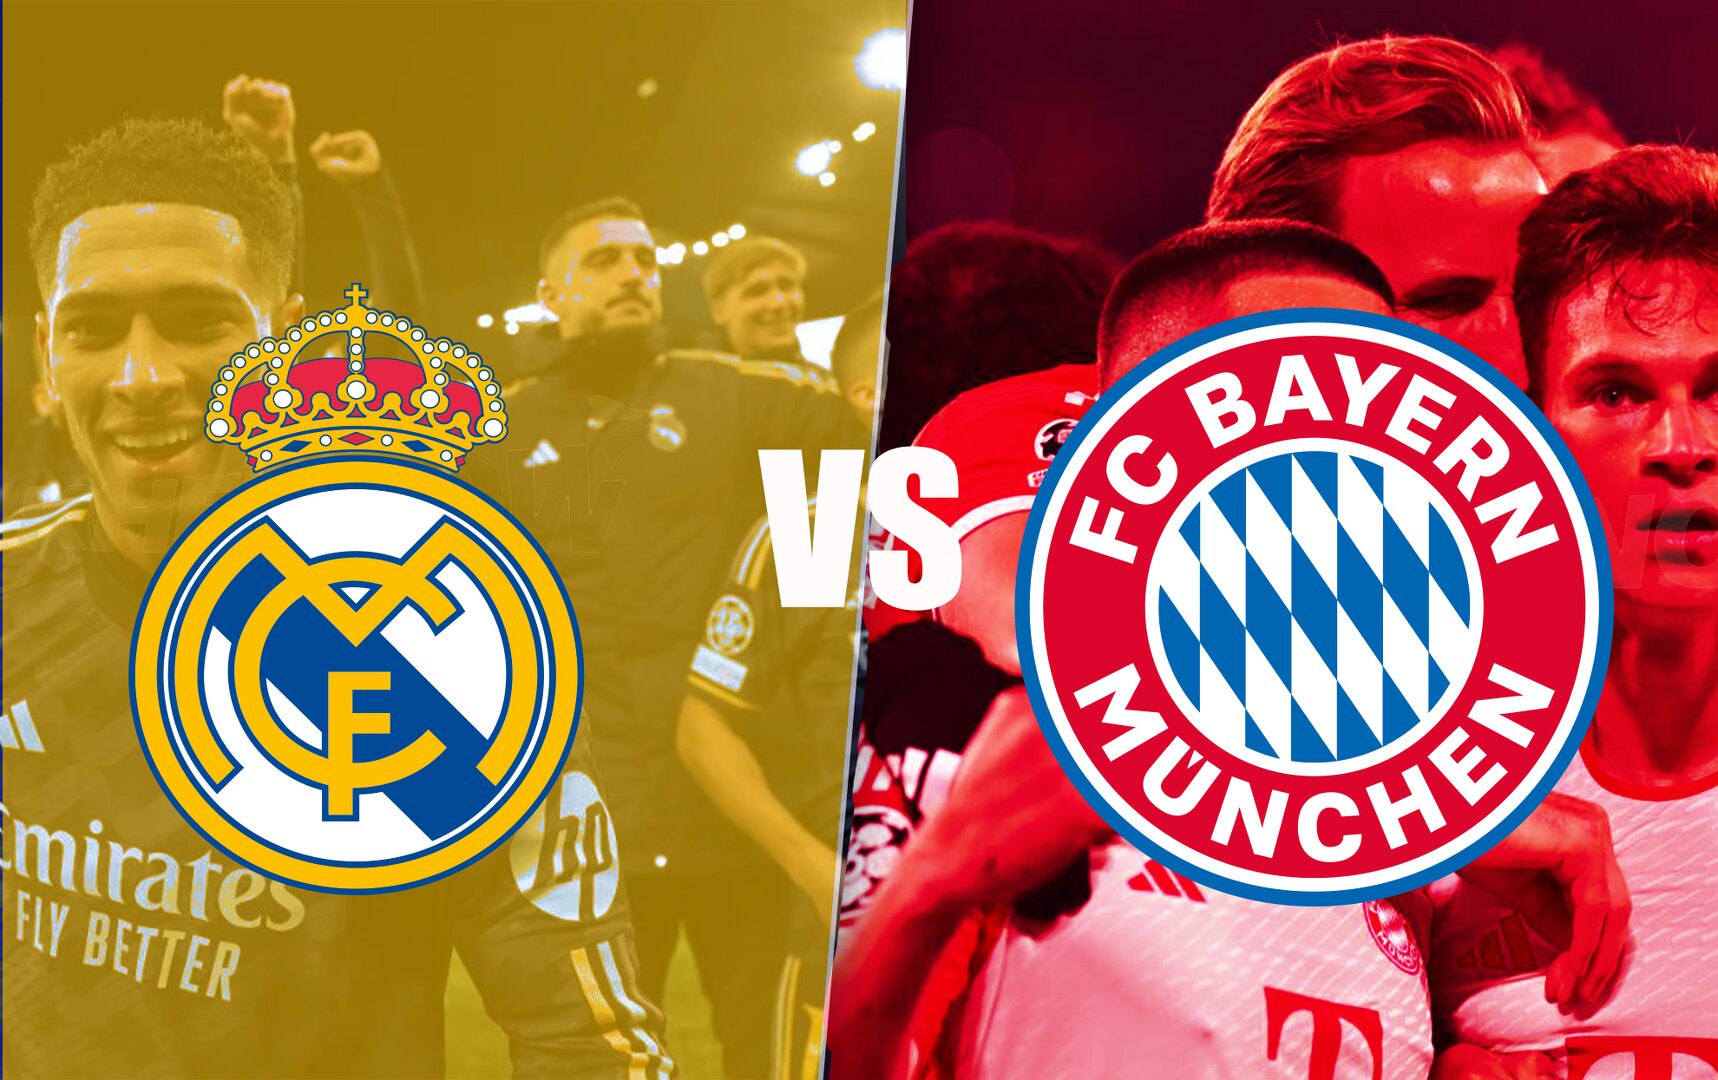 Real Madrid vs Bayern Munich: Live streaming, TV channel, kick-off time